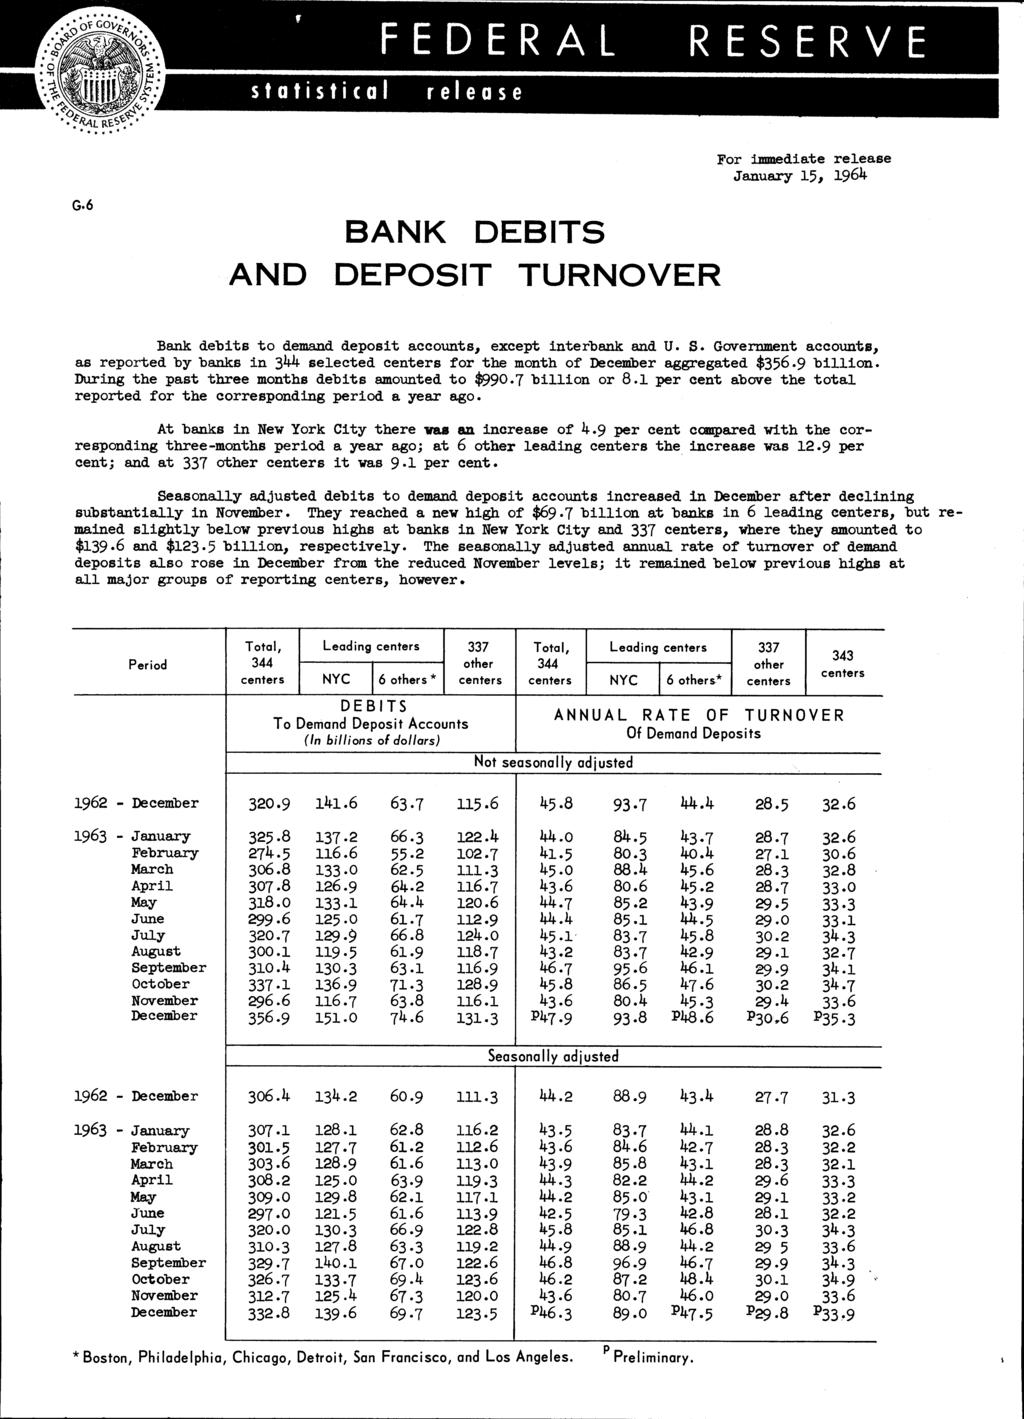 H statistical FEDERAL release RESERVE For immediate release January 15, 196k G.6 BANK DEBITS AND DEPOSIT TURNOVER Bank debits to demand deposit accounts, except interbank and U. S.